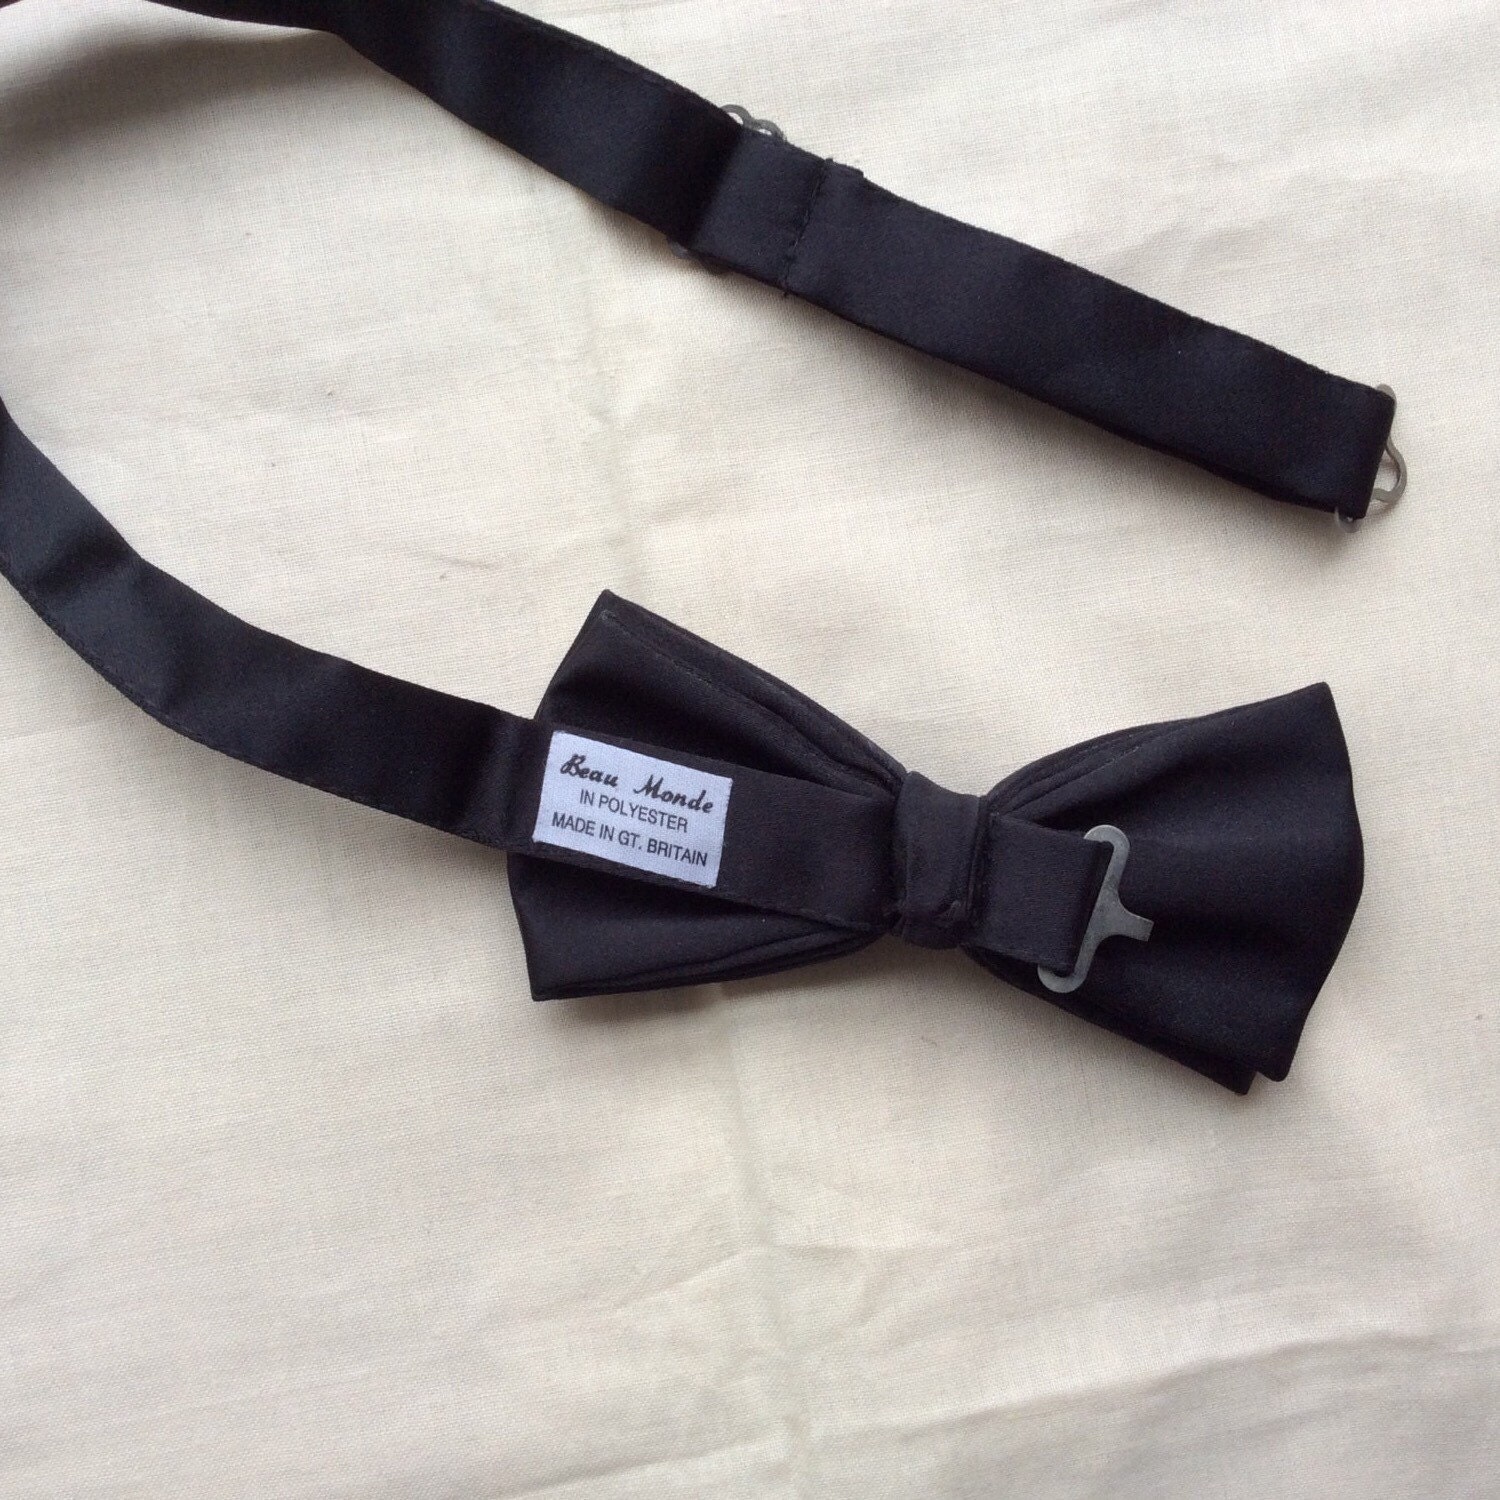 Black Polyester Bow Tie Beau Monde.made in Britain. - Etsy UK